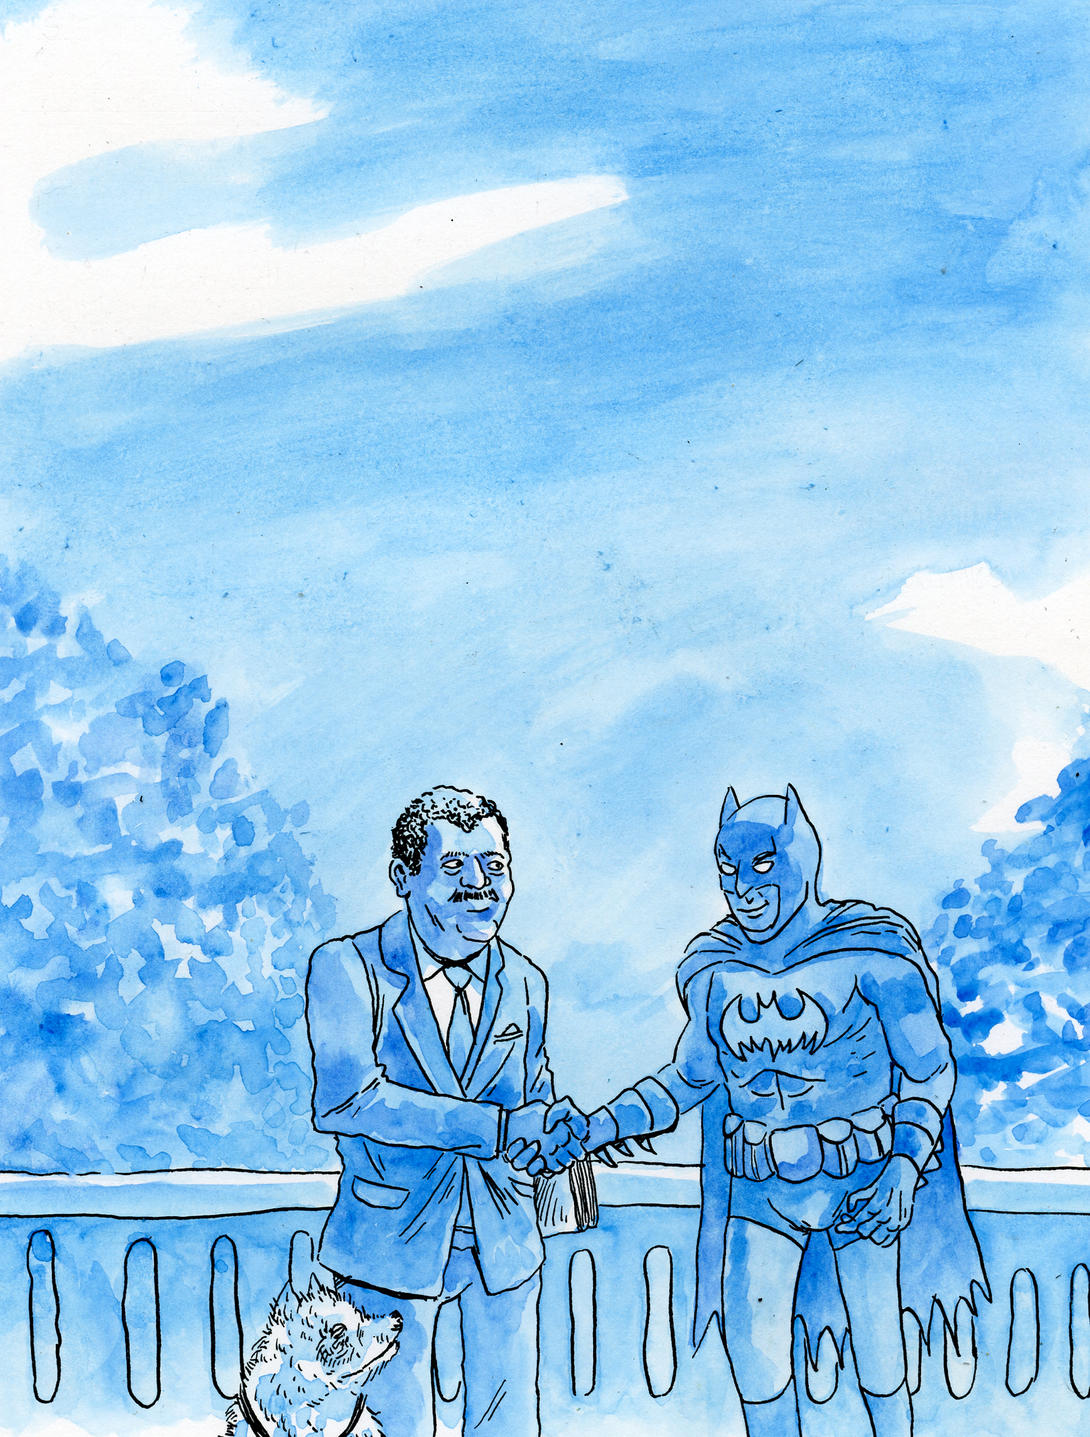 Illustration of Vince Rougeau shaking Batman's hand. A dog is sitting next to Vince